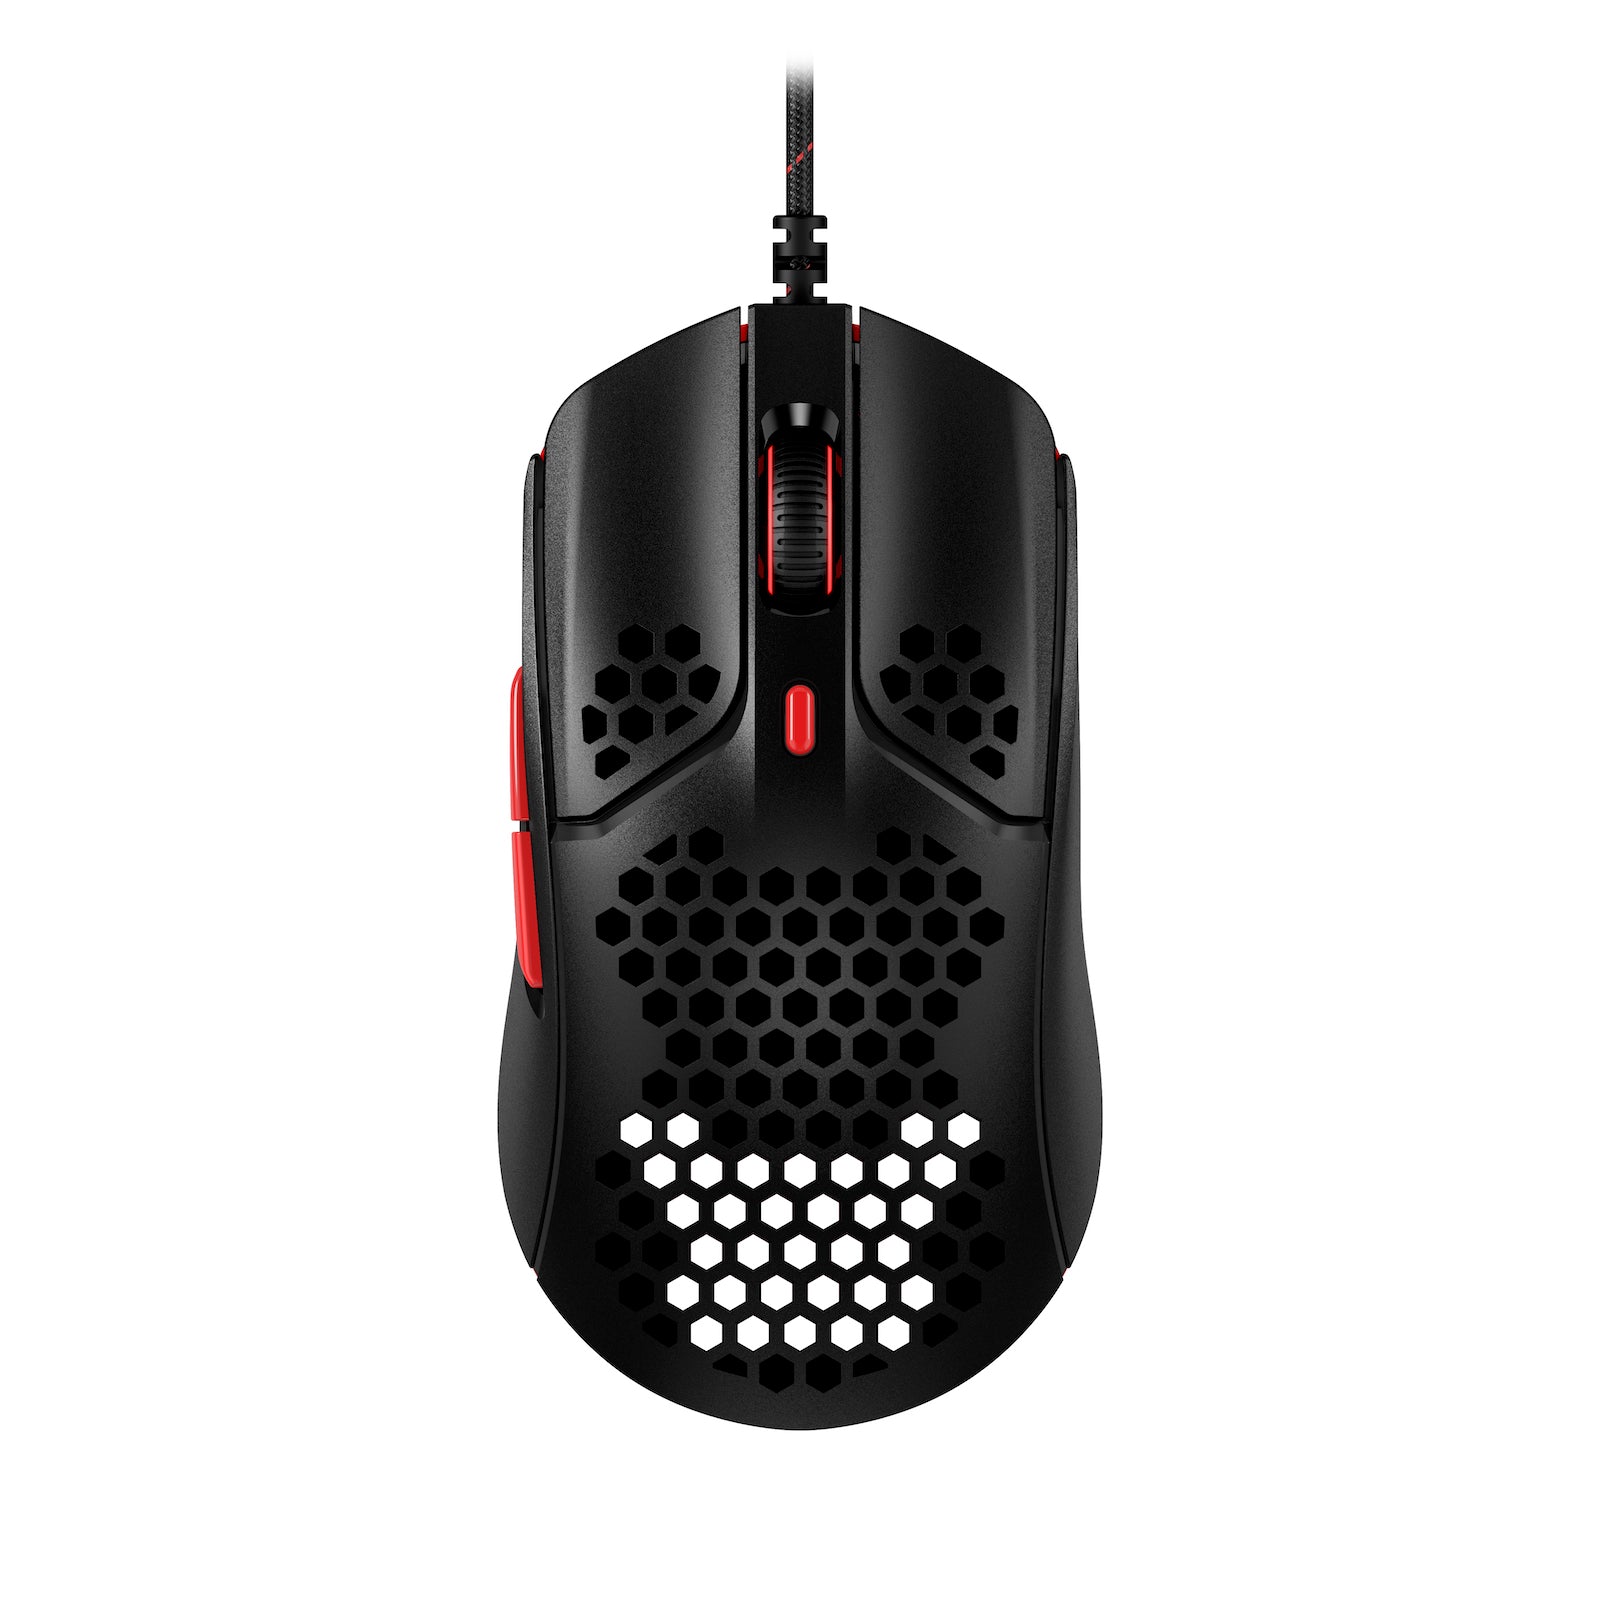 HyperX Pulsefire Haste Red-Black Gaming Mouse - view from above